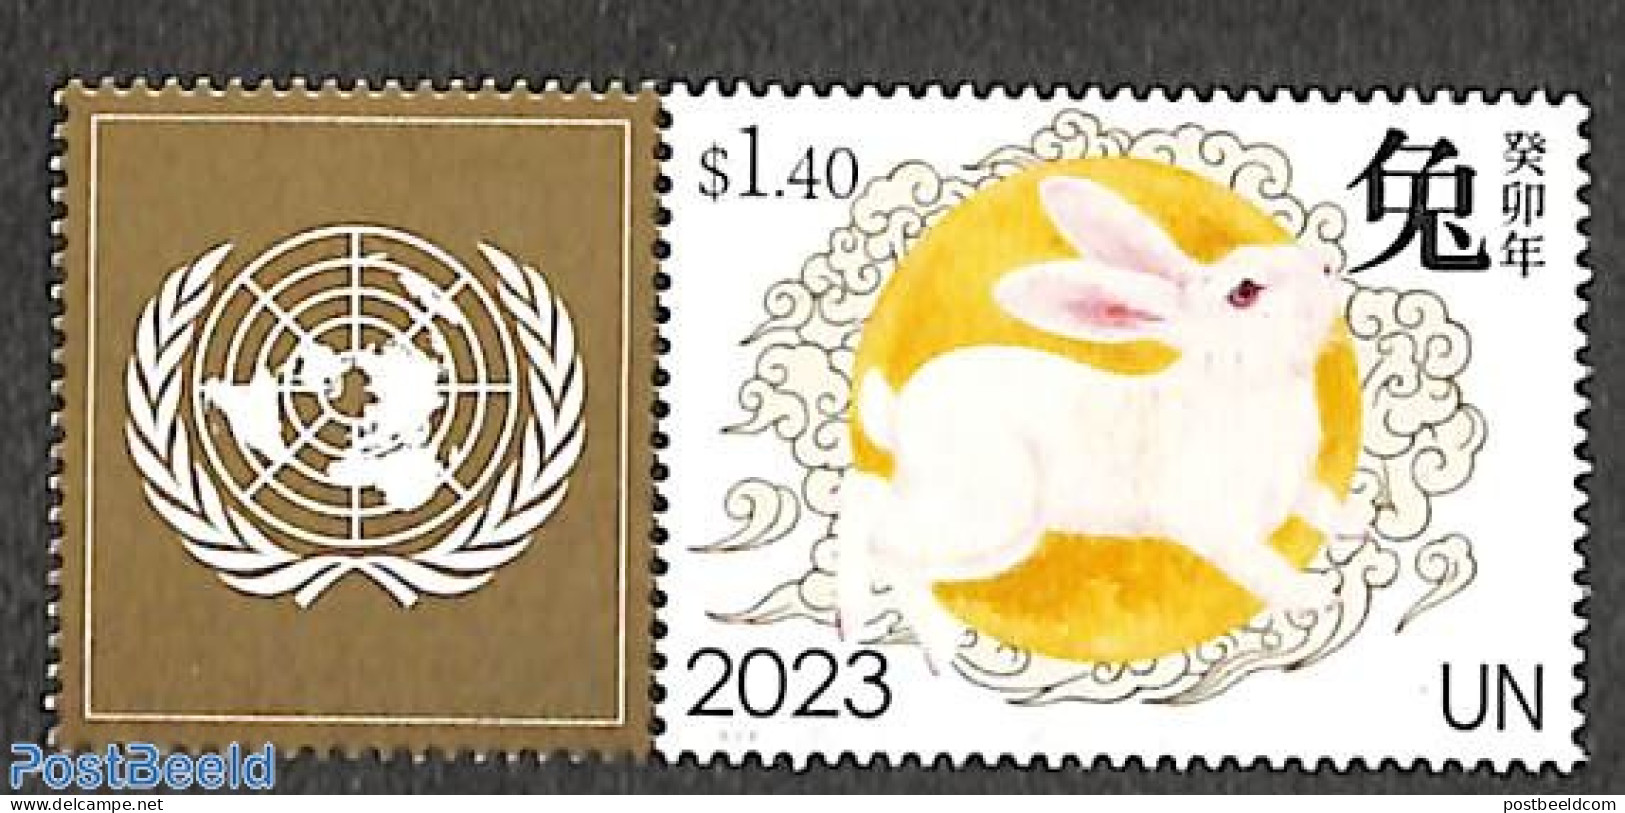 United Nations, New York 2023 Year Of The Rabbit 1v+tab, Mint NH, Nature - Various - Rabbits / Hares - New Year - New Year